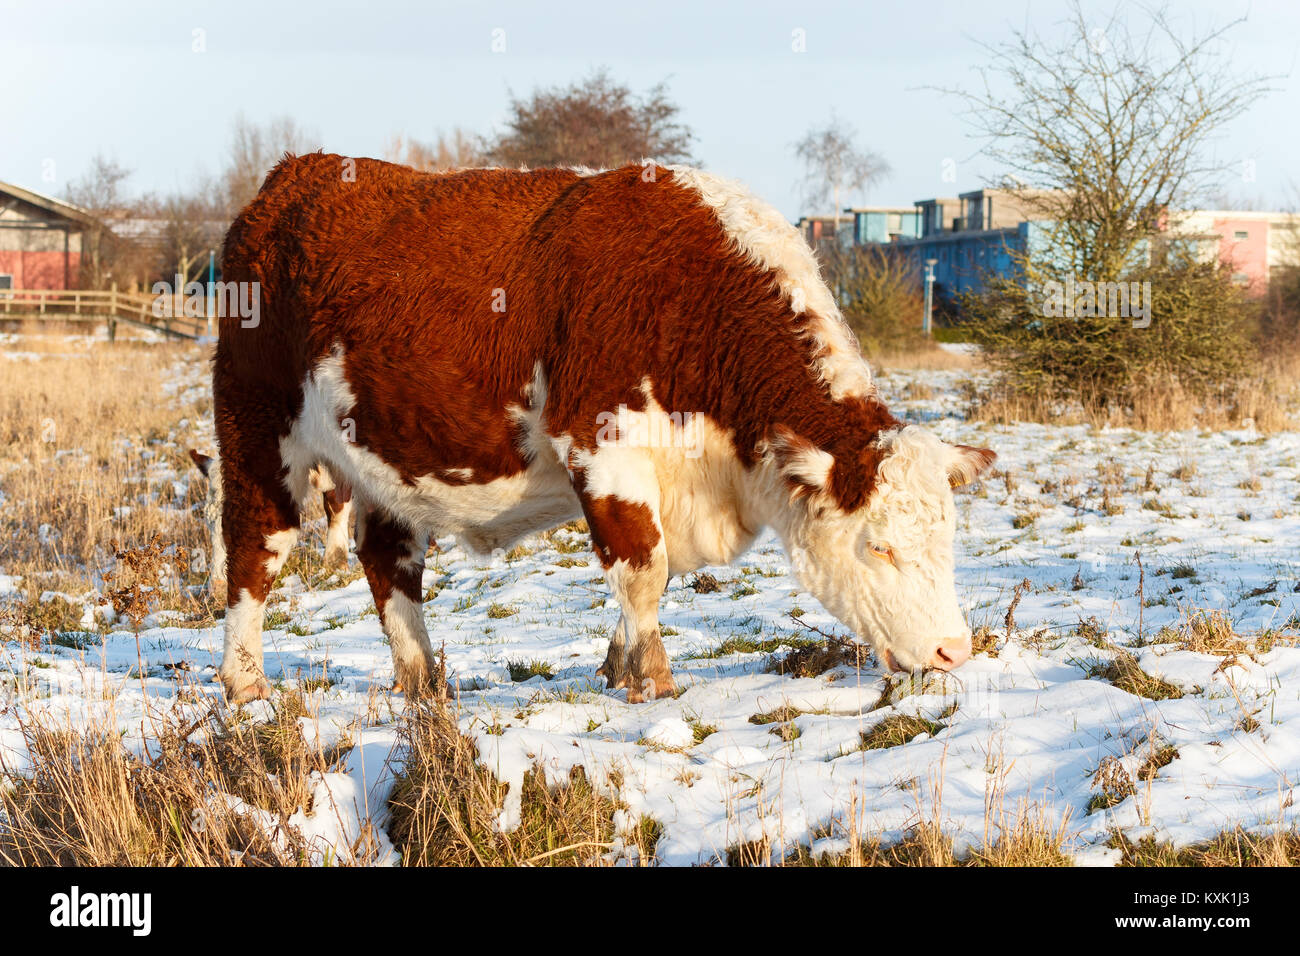 Big highland cattle of scotland searching for food in a park in the winter Stock Photo